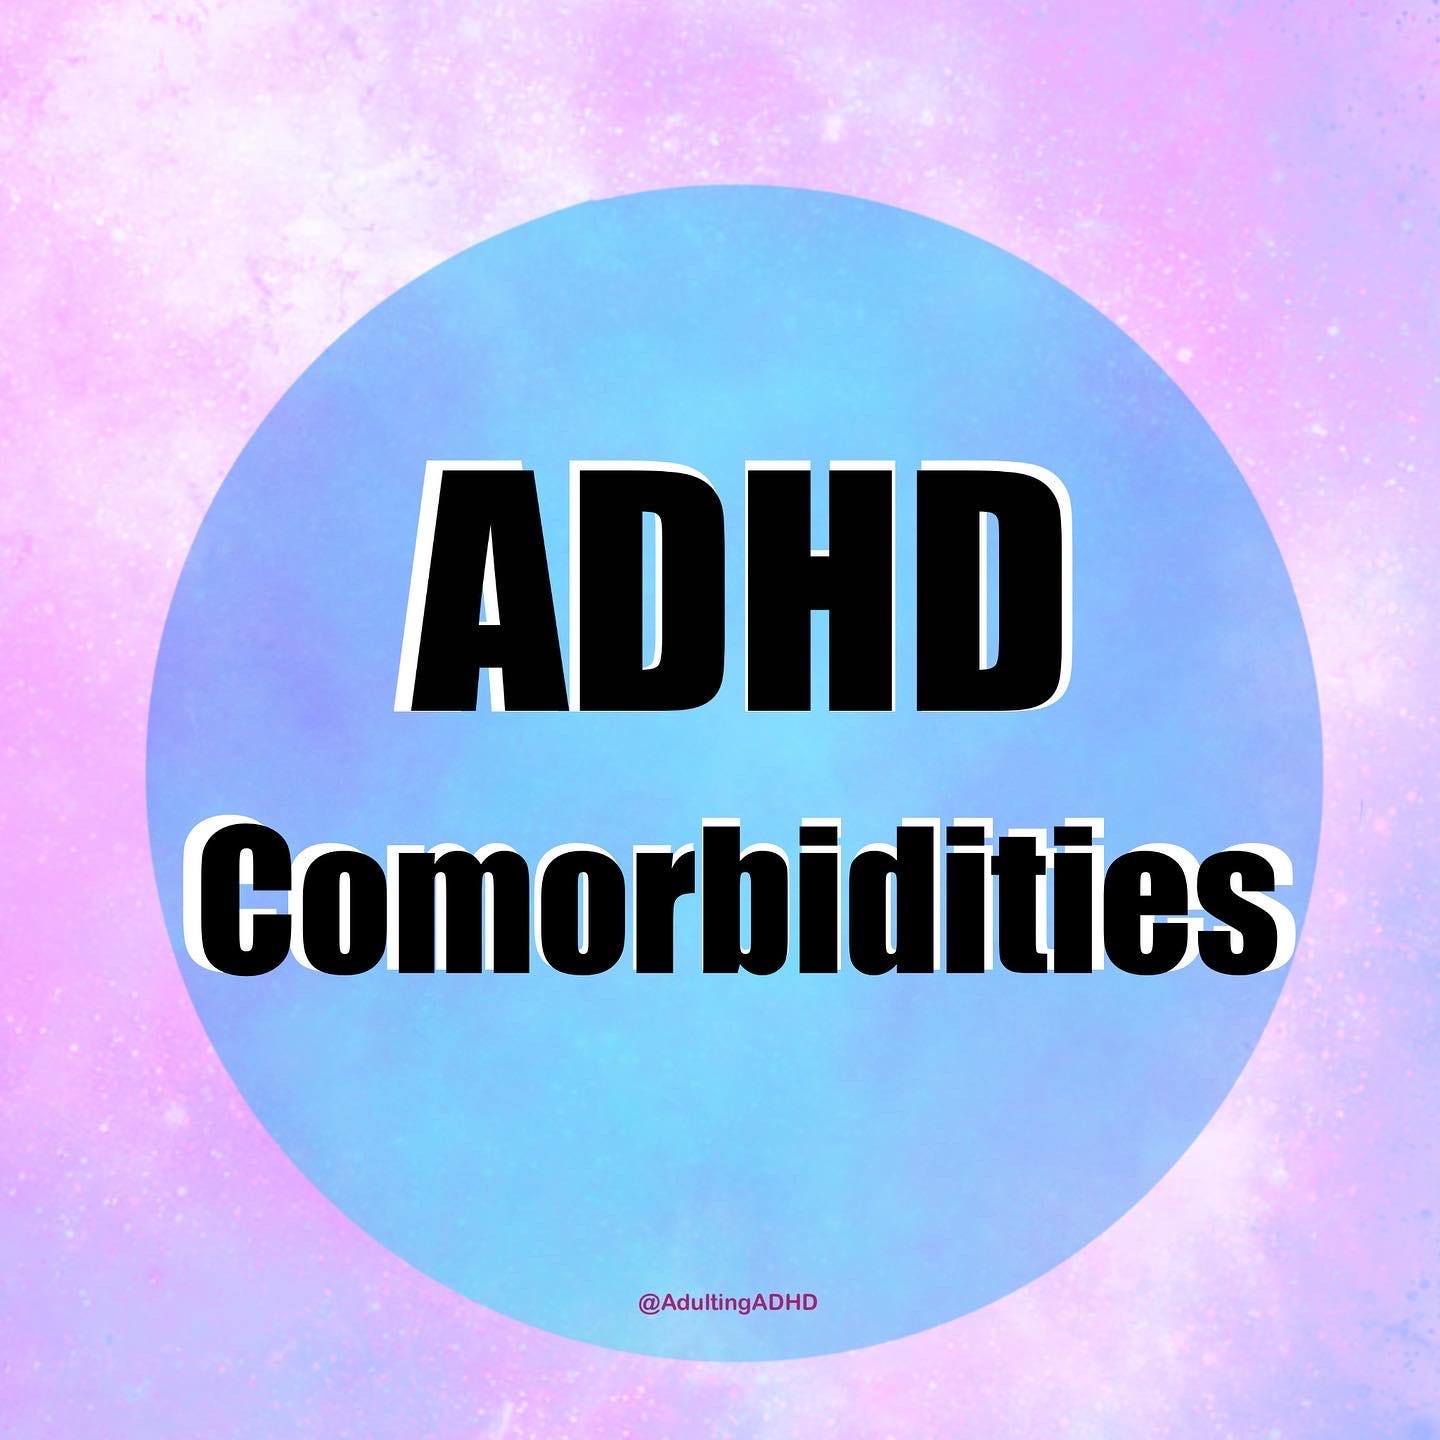 The words ‘ADHD Comorbidities’  written on a baby blue circle background.